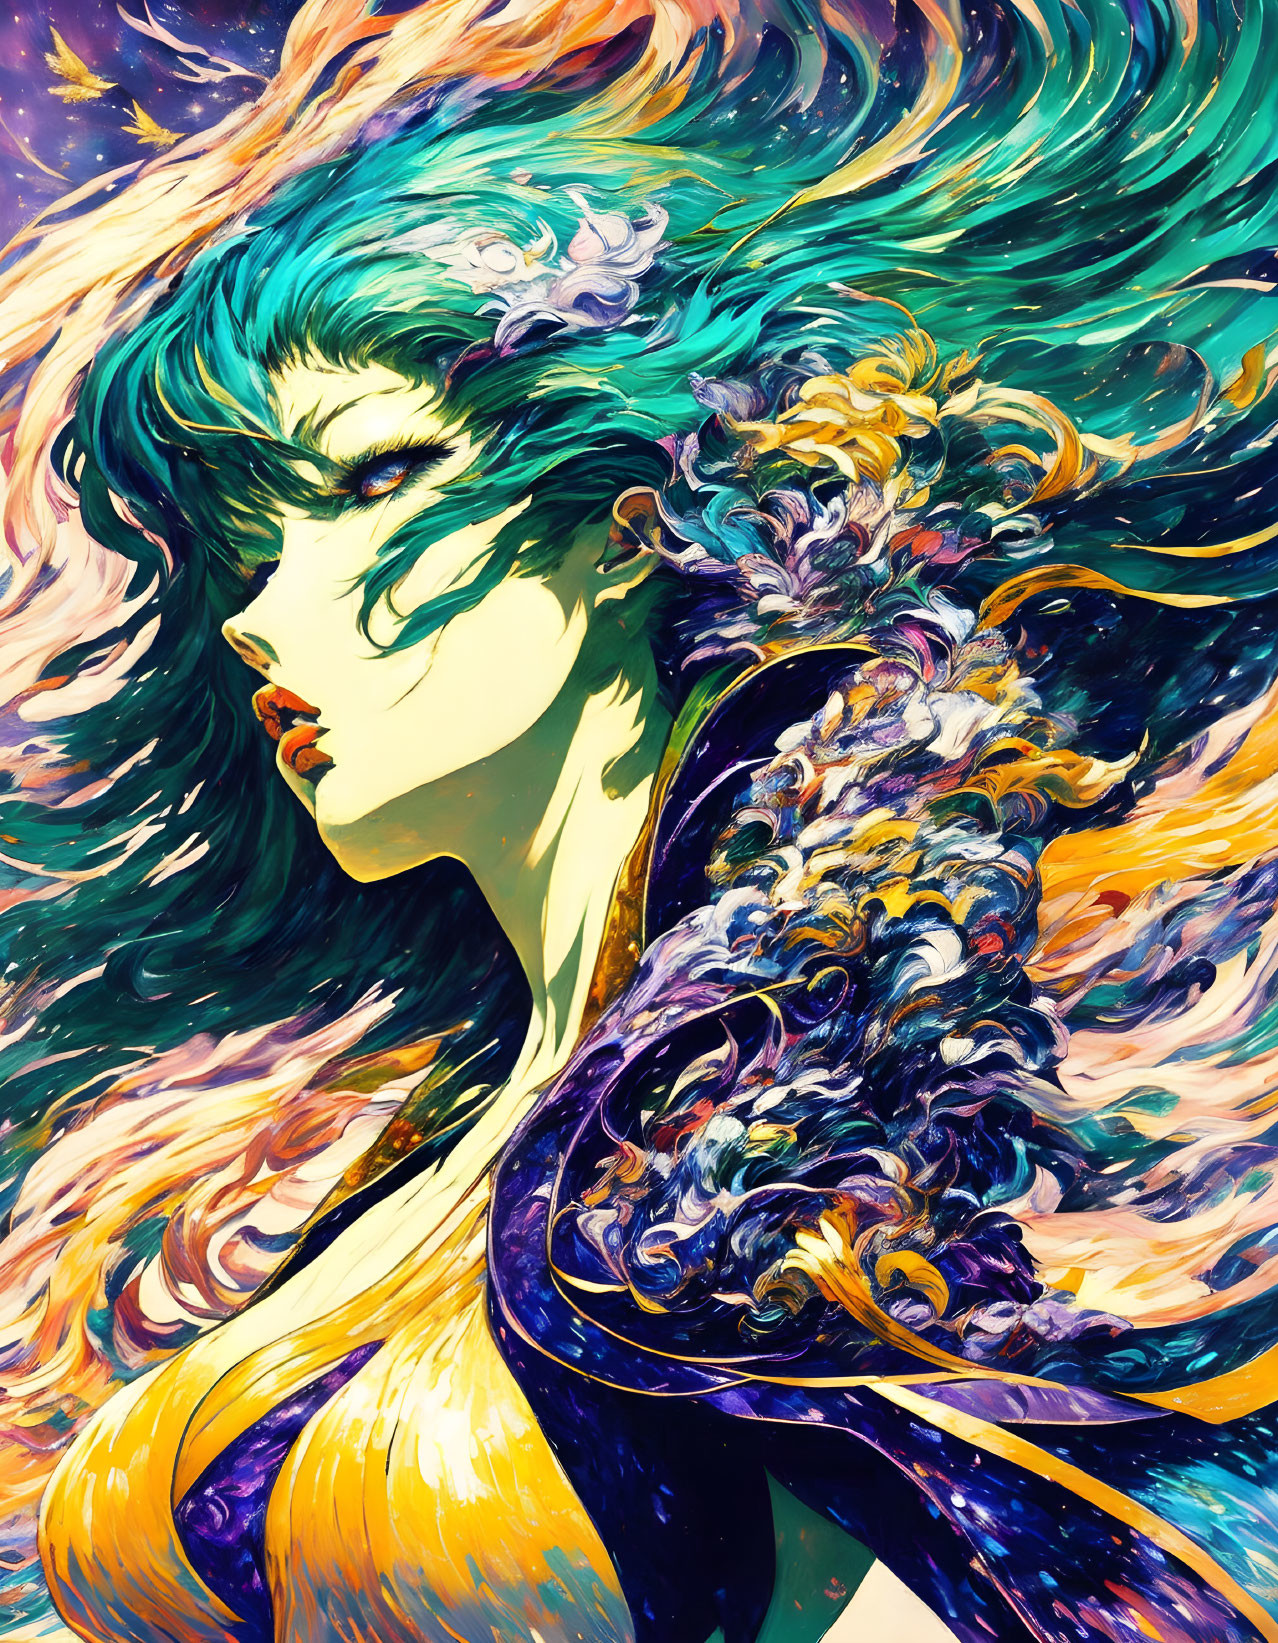 Colorful digital artwork of a woman with flowing hair and dress in vivid blues, purples,